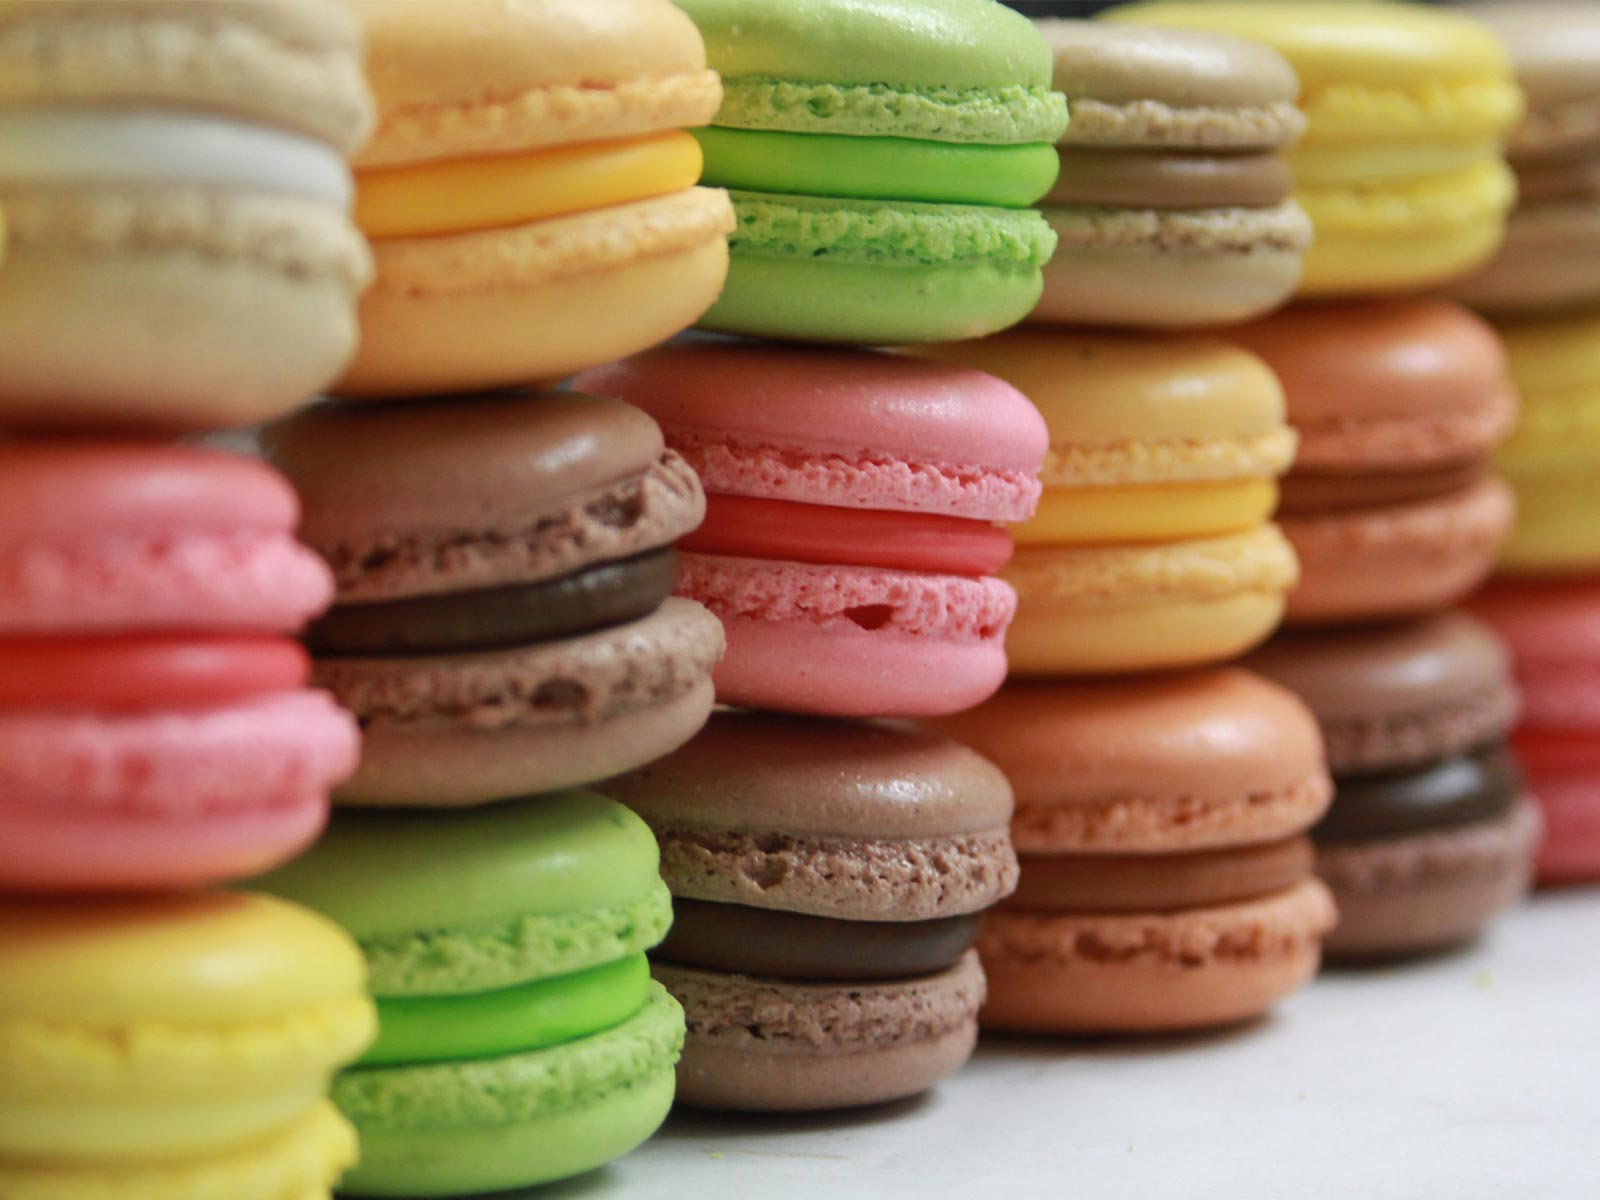 https://hackingdistributed.com/images/2014-11-23-macaroons-in-hyperdex/pretty-macaroons-2.jpg